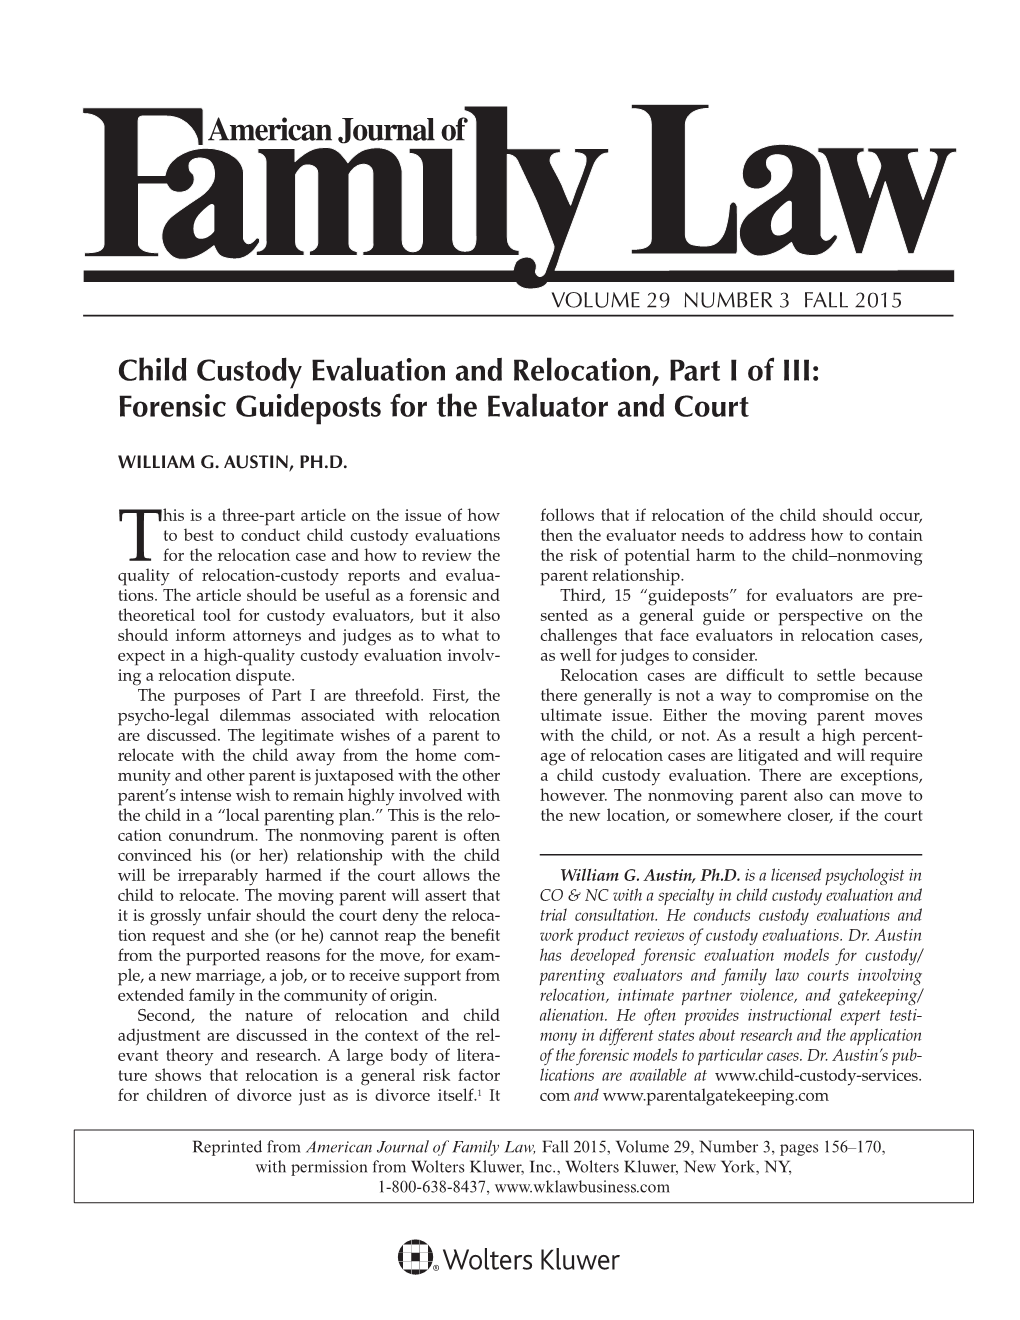 Child Custody Evaluation and Relocation: Part I, 2015